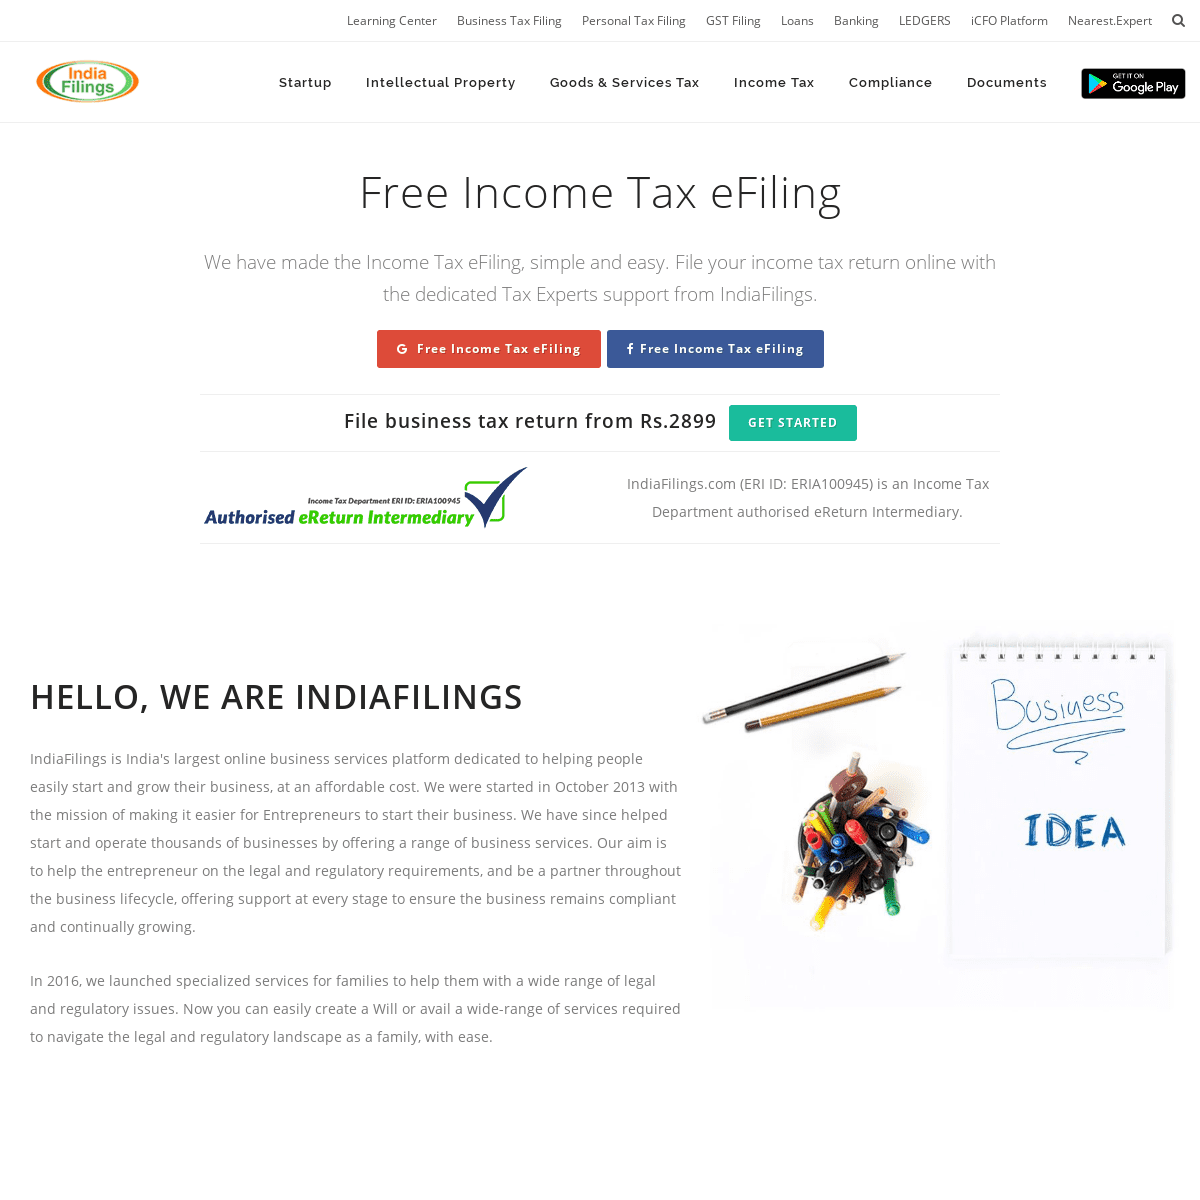 A complete backup of indiafilings.com